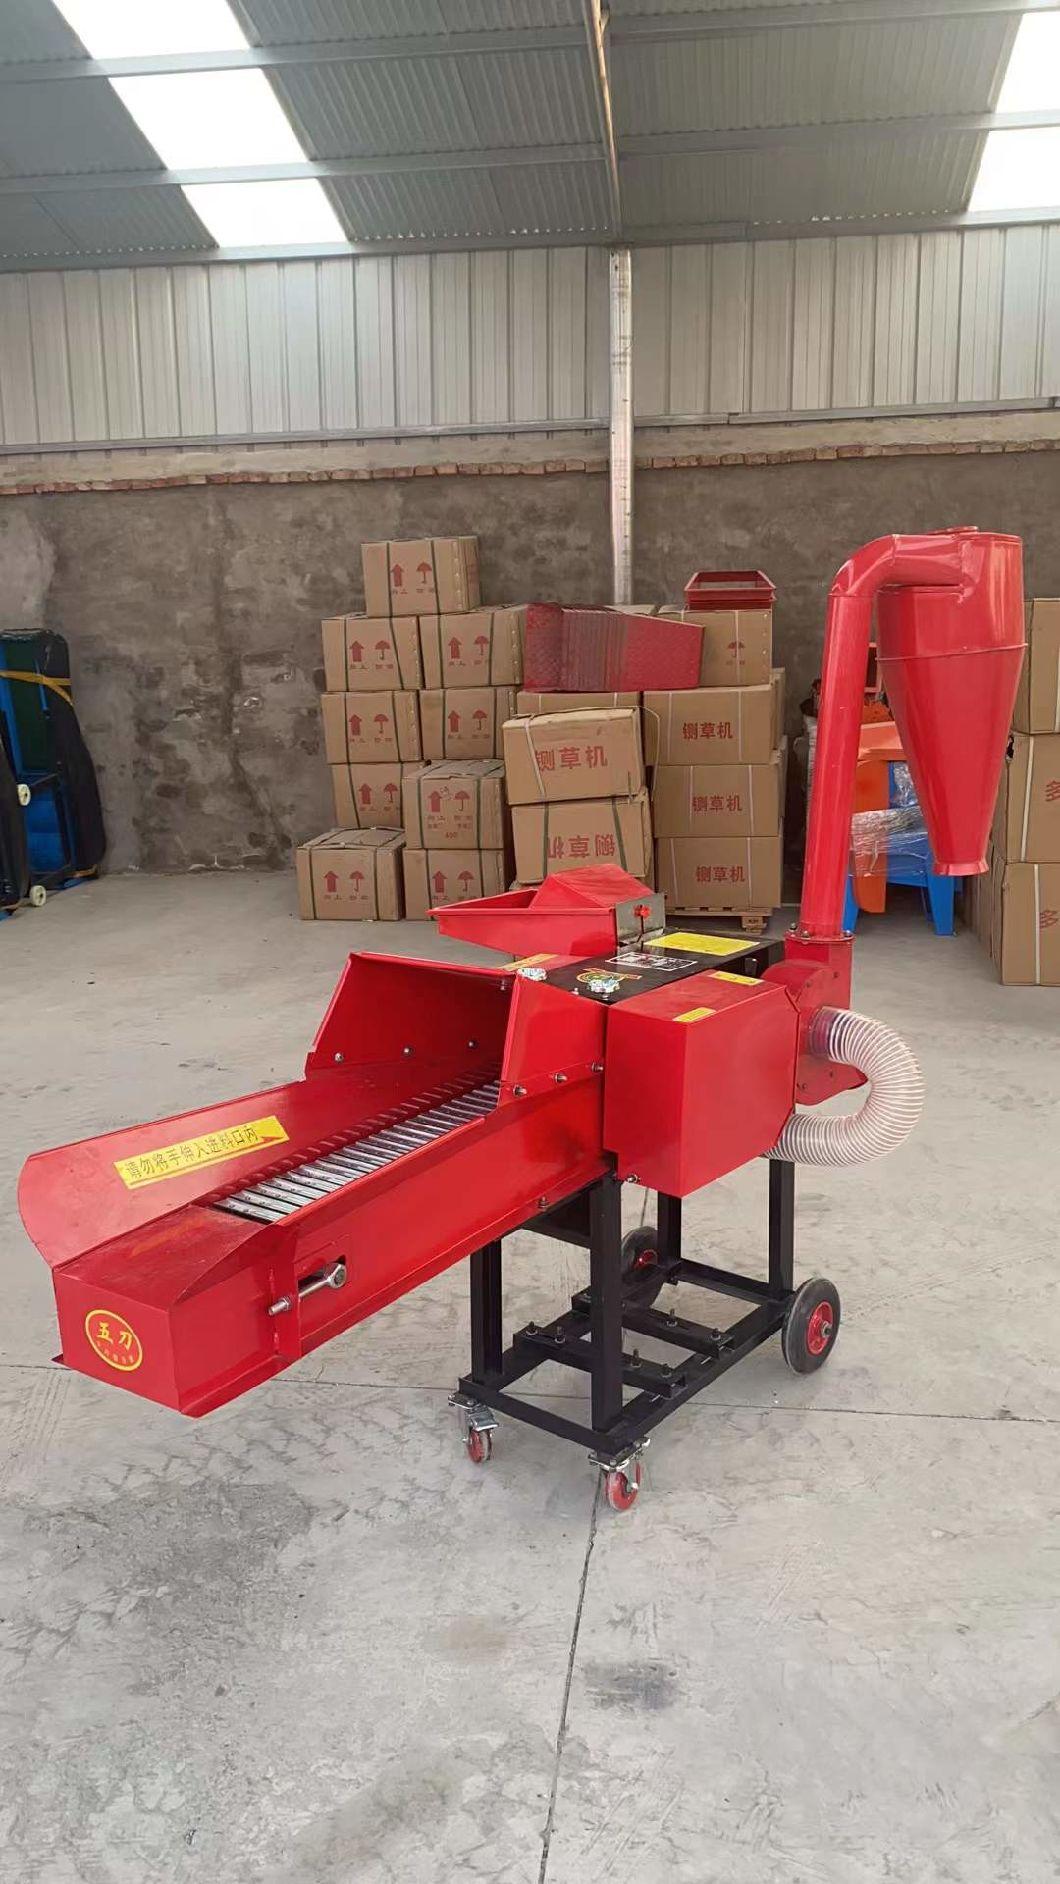 Wholesale Guillotine Machine, Kneading Machine, All-in-One Machine, Three-Phase Electricity, Cattle and Sheep Feed Breeding, Soft Silk Machine, Grass Cutter